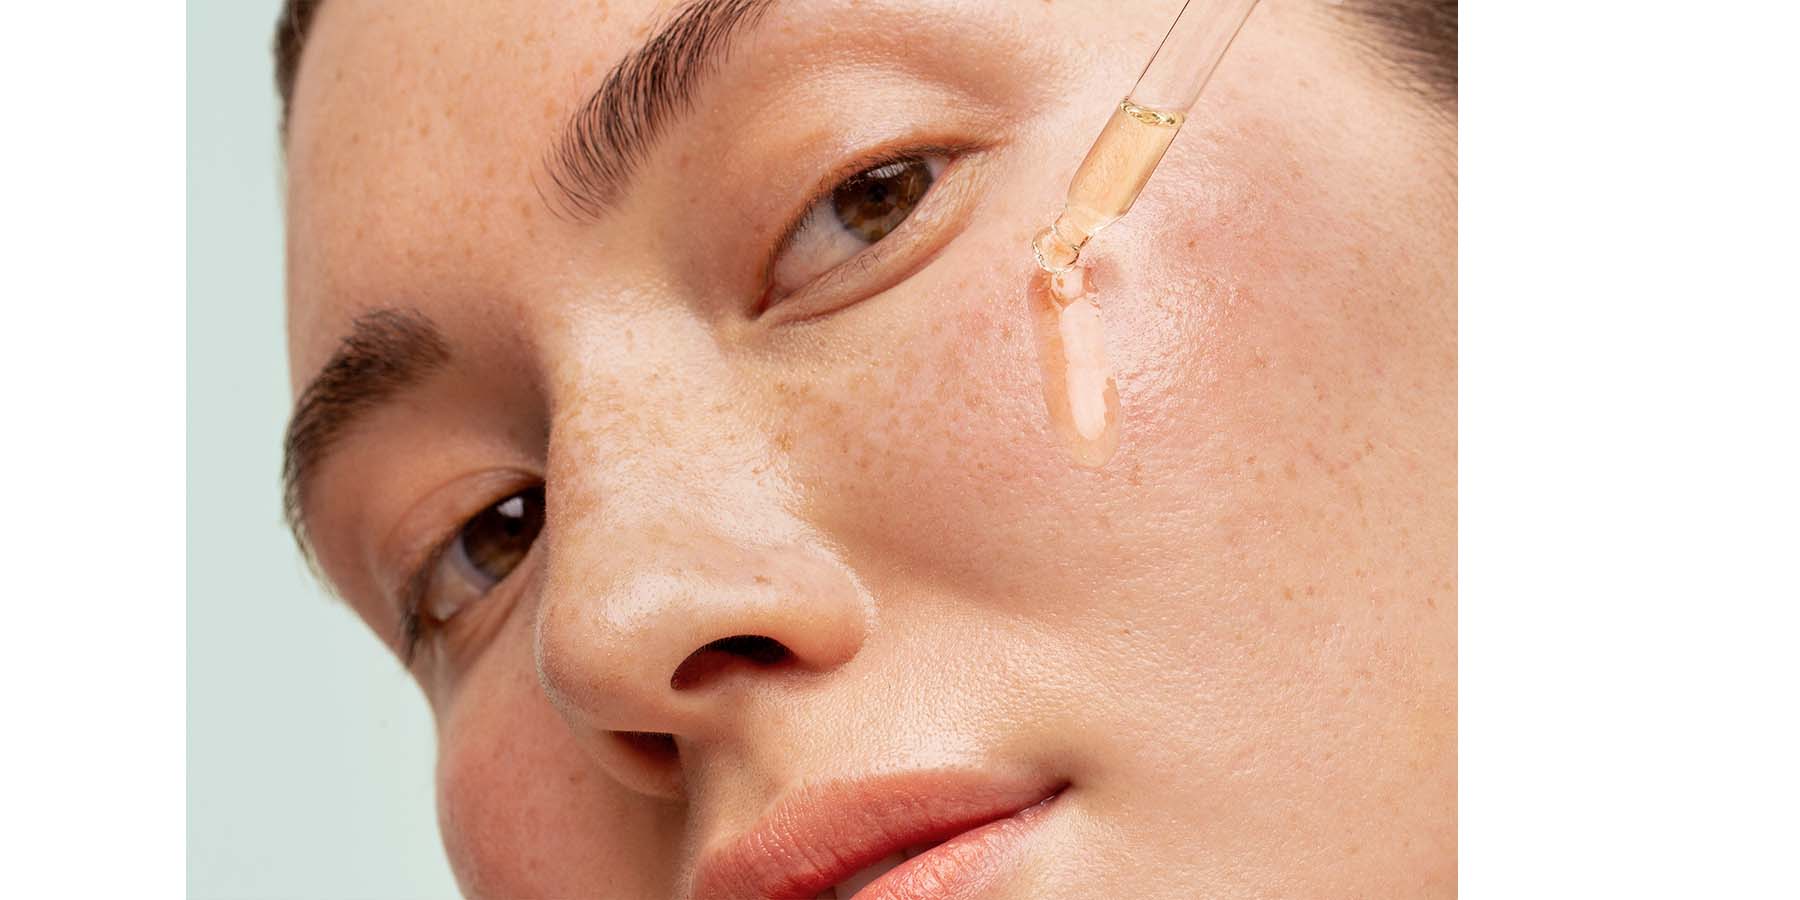 Facial Oils vs Serums: What’s the difference?